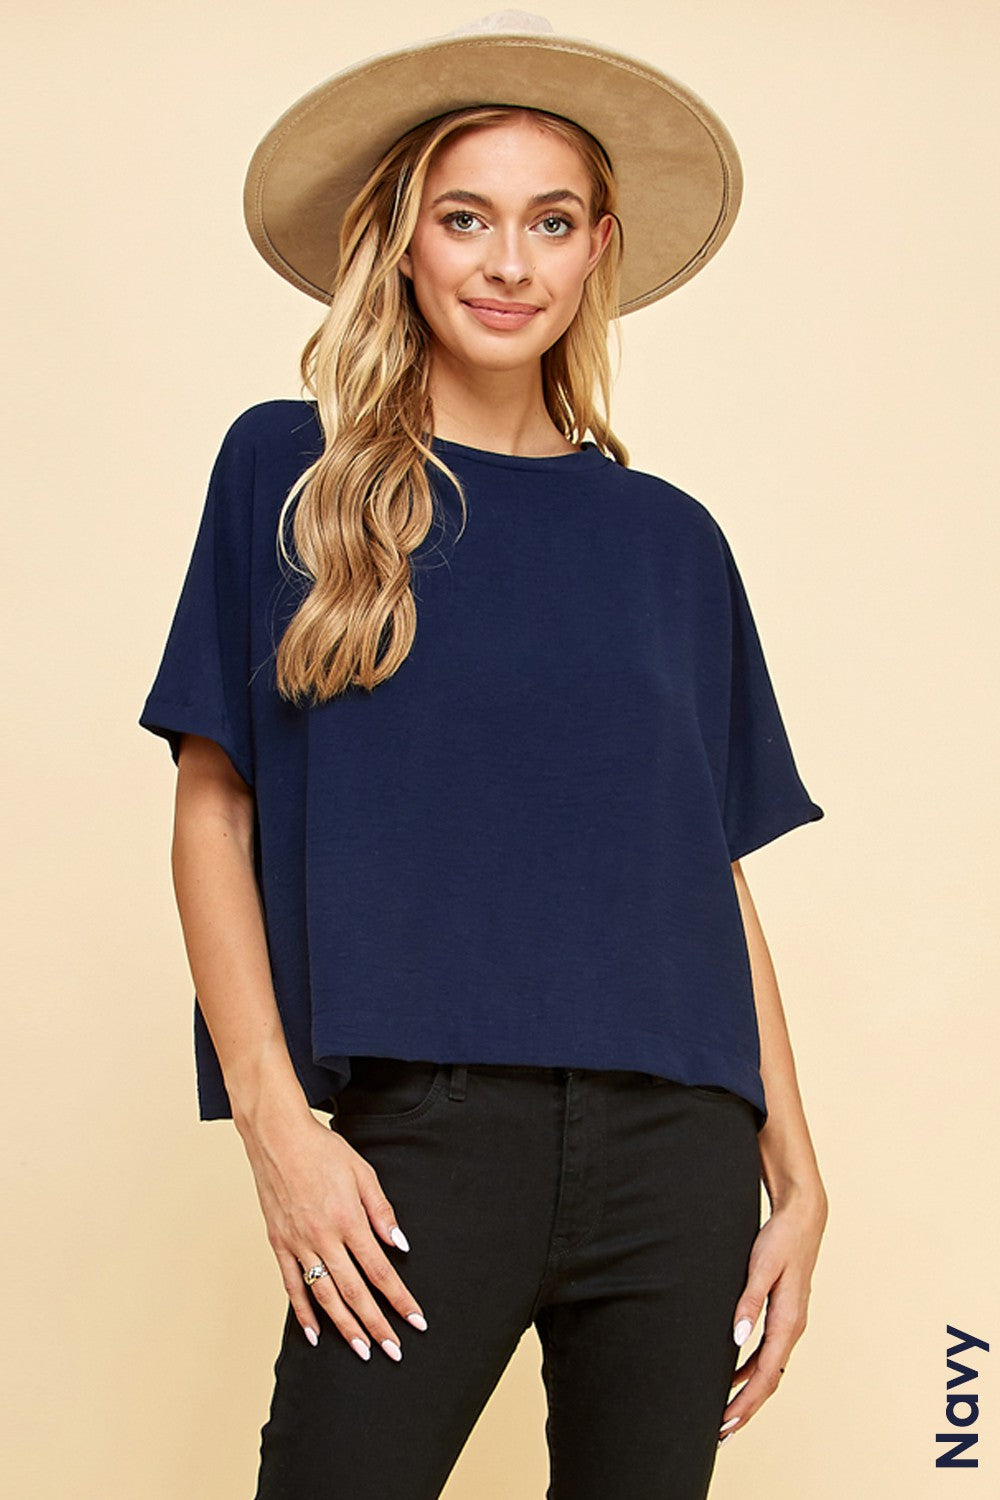 A woman wearing a hat and jeans paired with a Les Amis Fashion Navy | Solid Top 1/2 Sleeves.